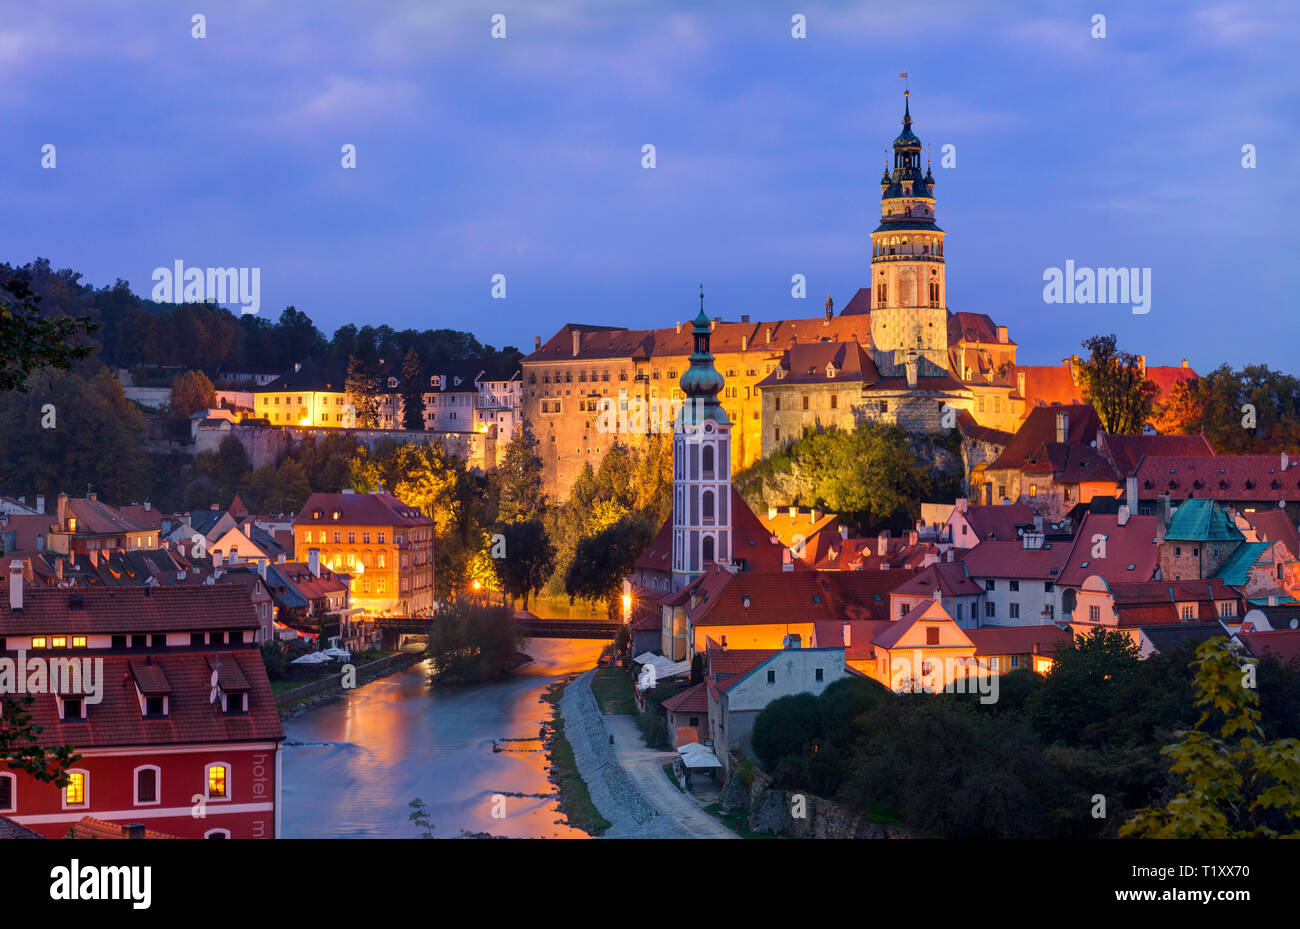 An illuminated evening view over the city of Cesky Krumlov in southern Bohemia, Czech Republic. Stock Photo